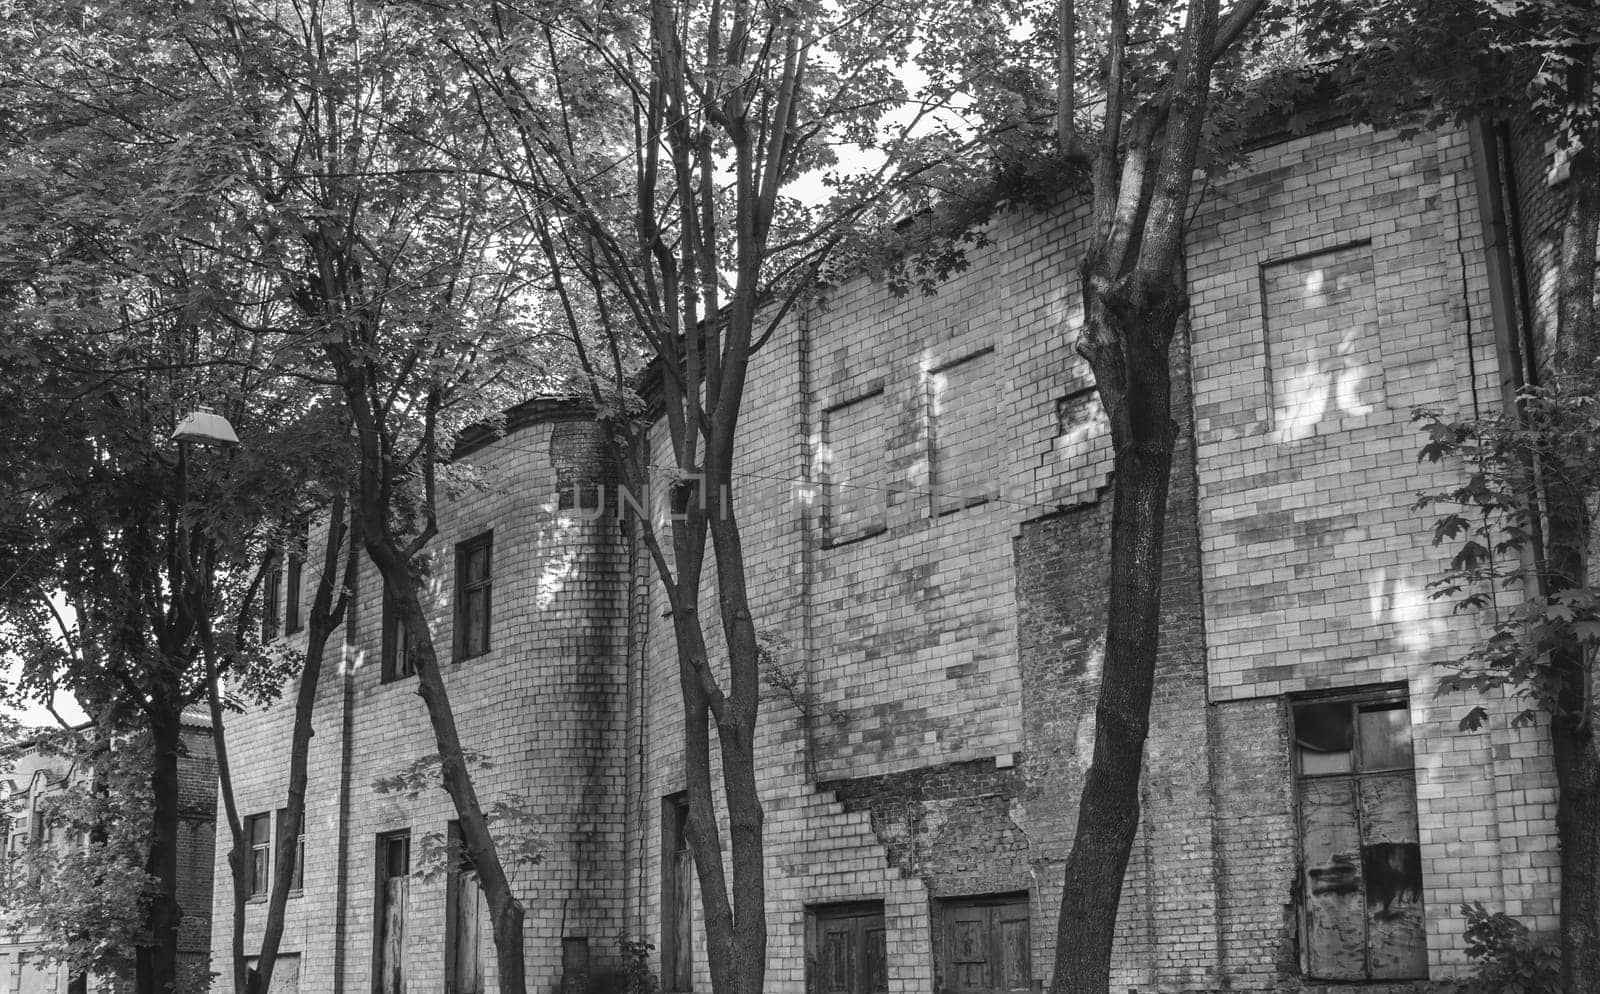 Abandoned building old architecture black and white photo. Brick destroyed building photography. Street scene. High quality picture for wallpaper, travel blog.